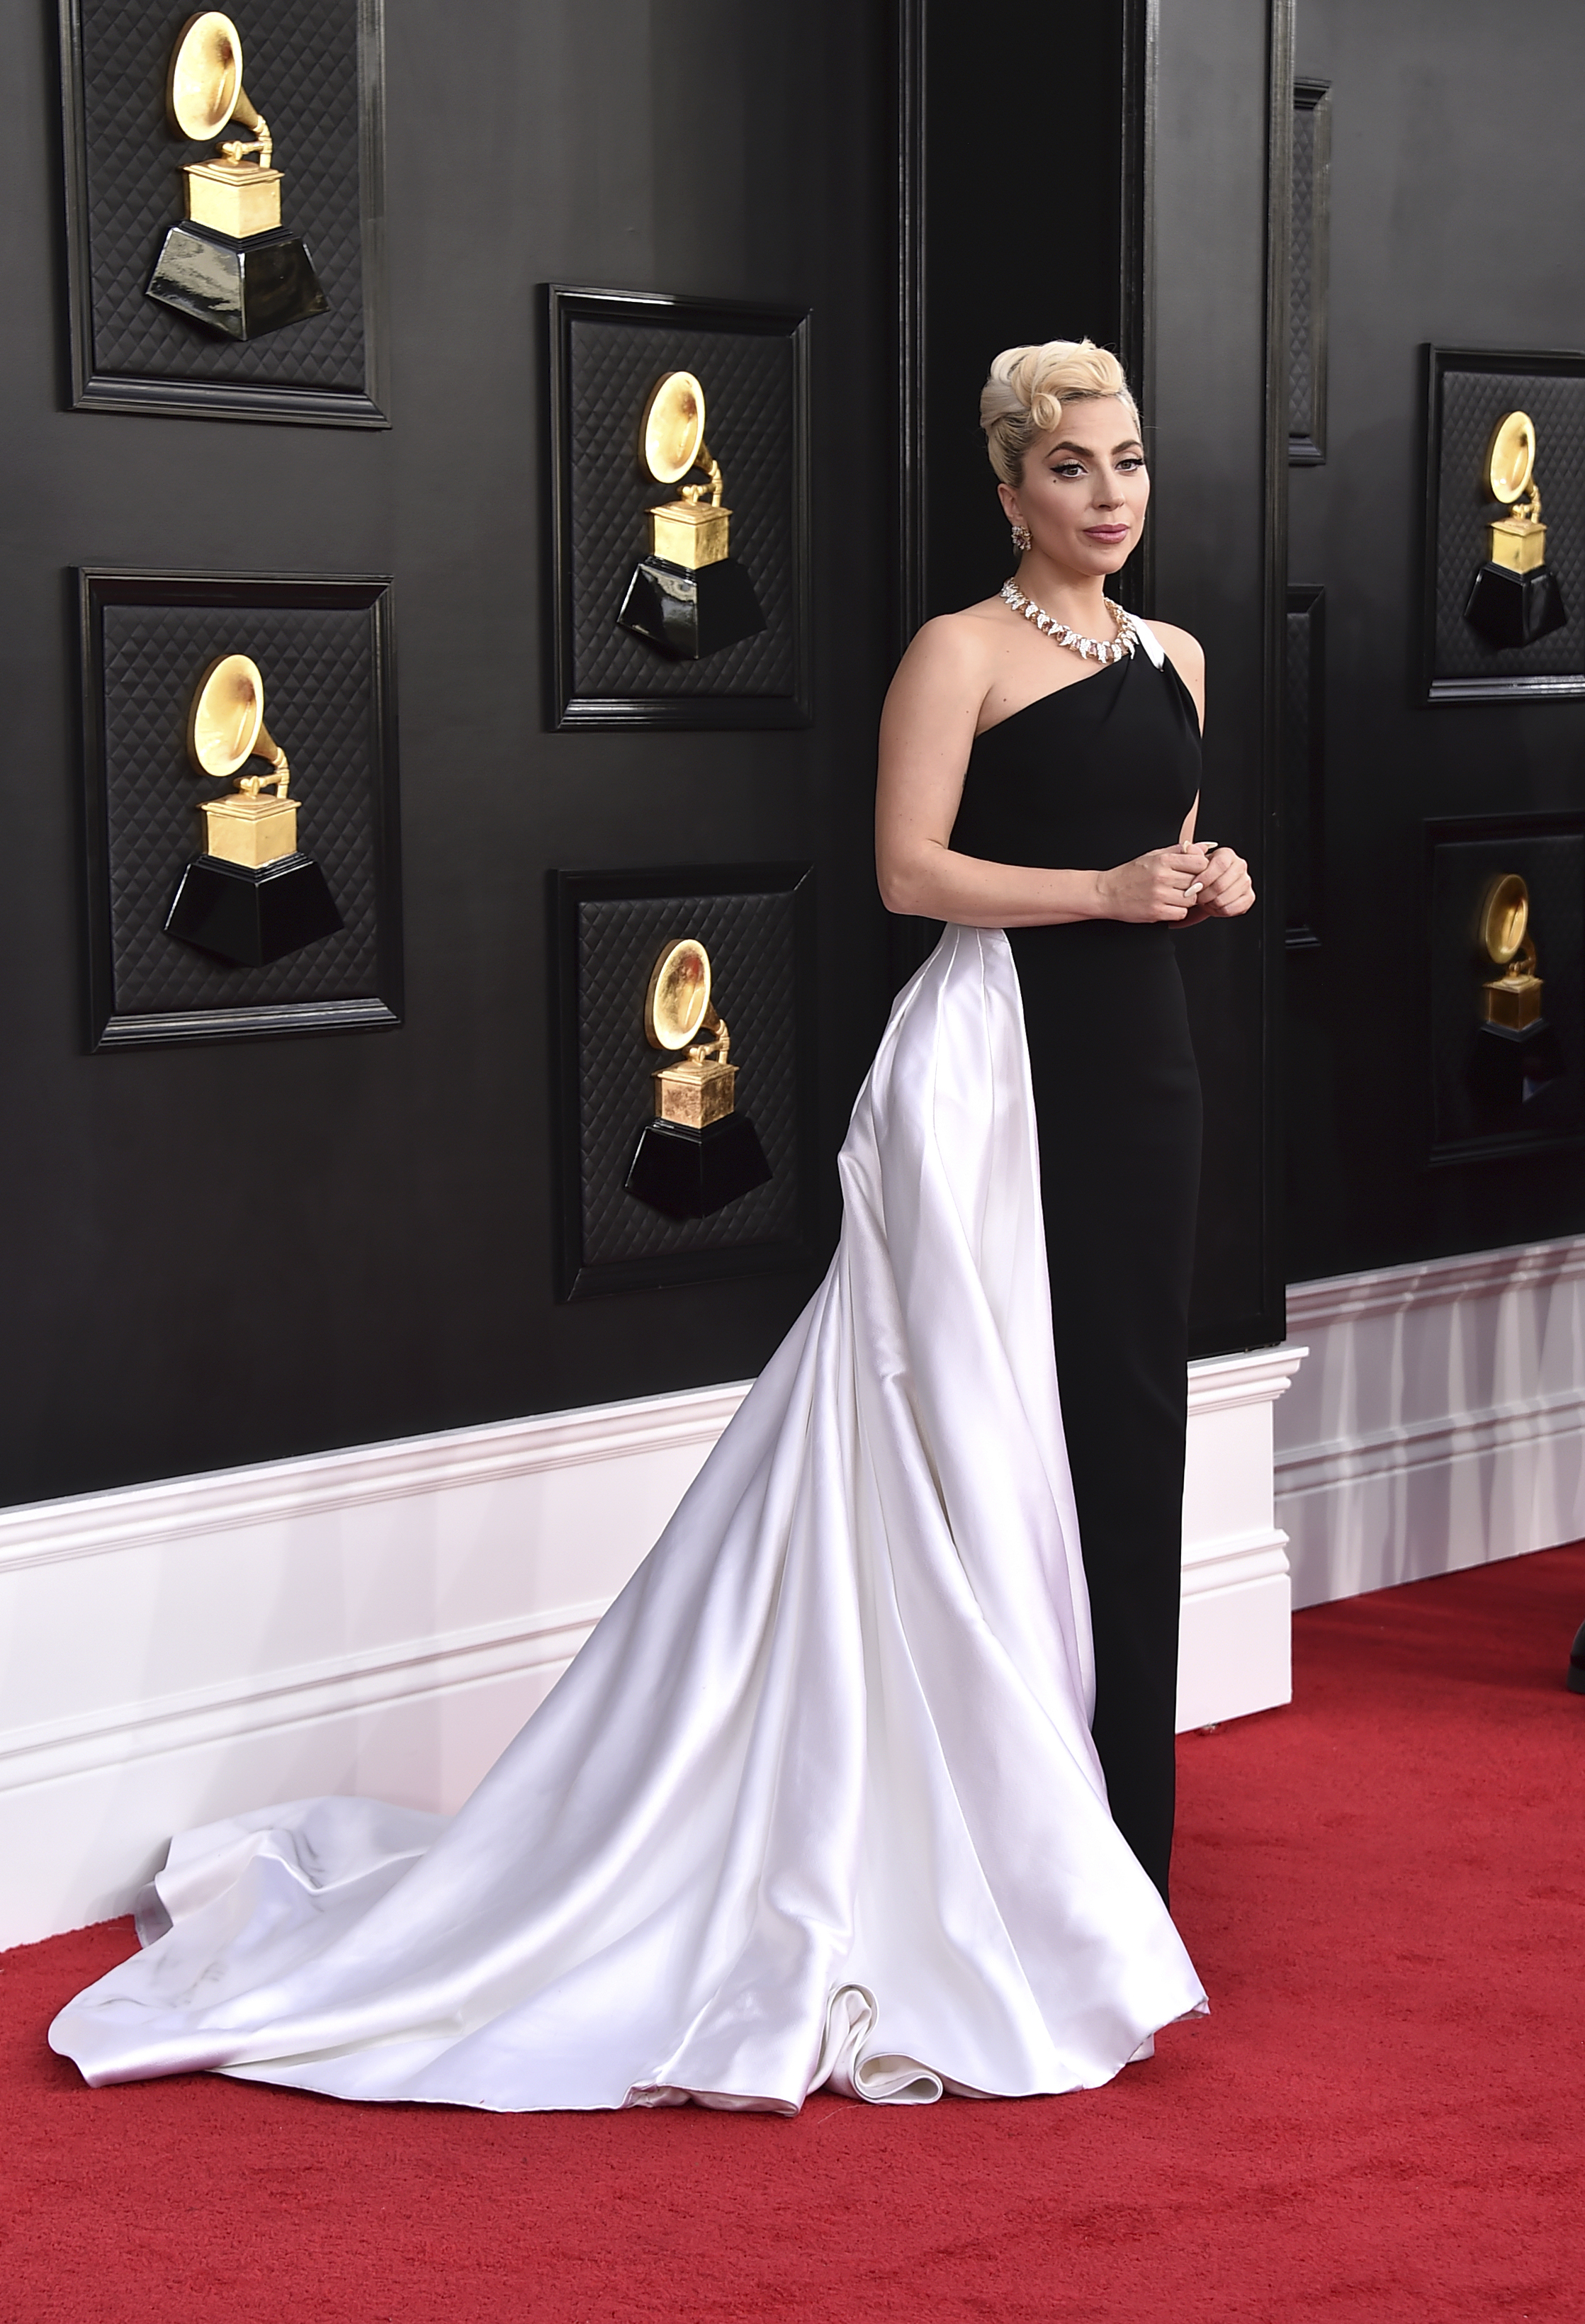 lady gaga stands on the grammys red carpet wearing a long black gown with a white bustle train